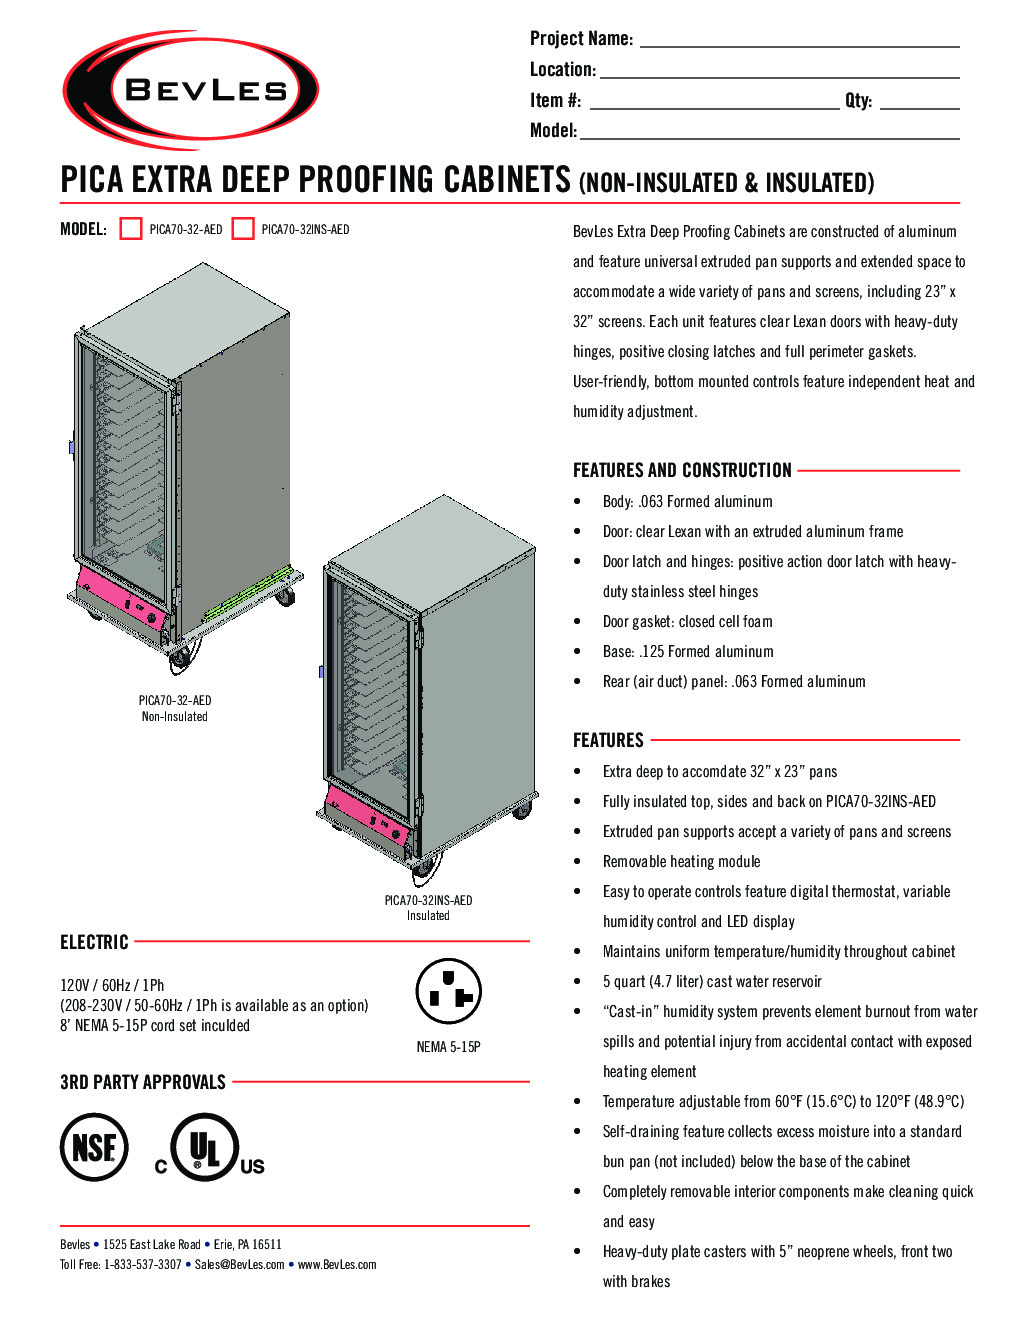 BevLes Company PICA70-32INS-AED-4L2 Mobile Proofer Cabinet